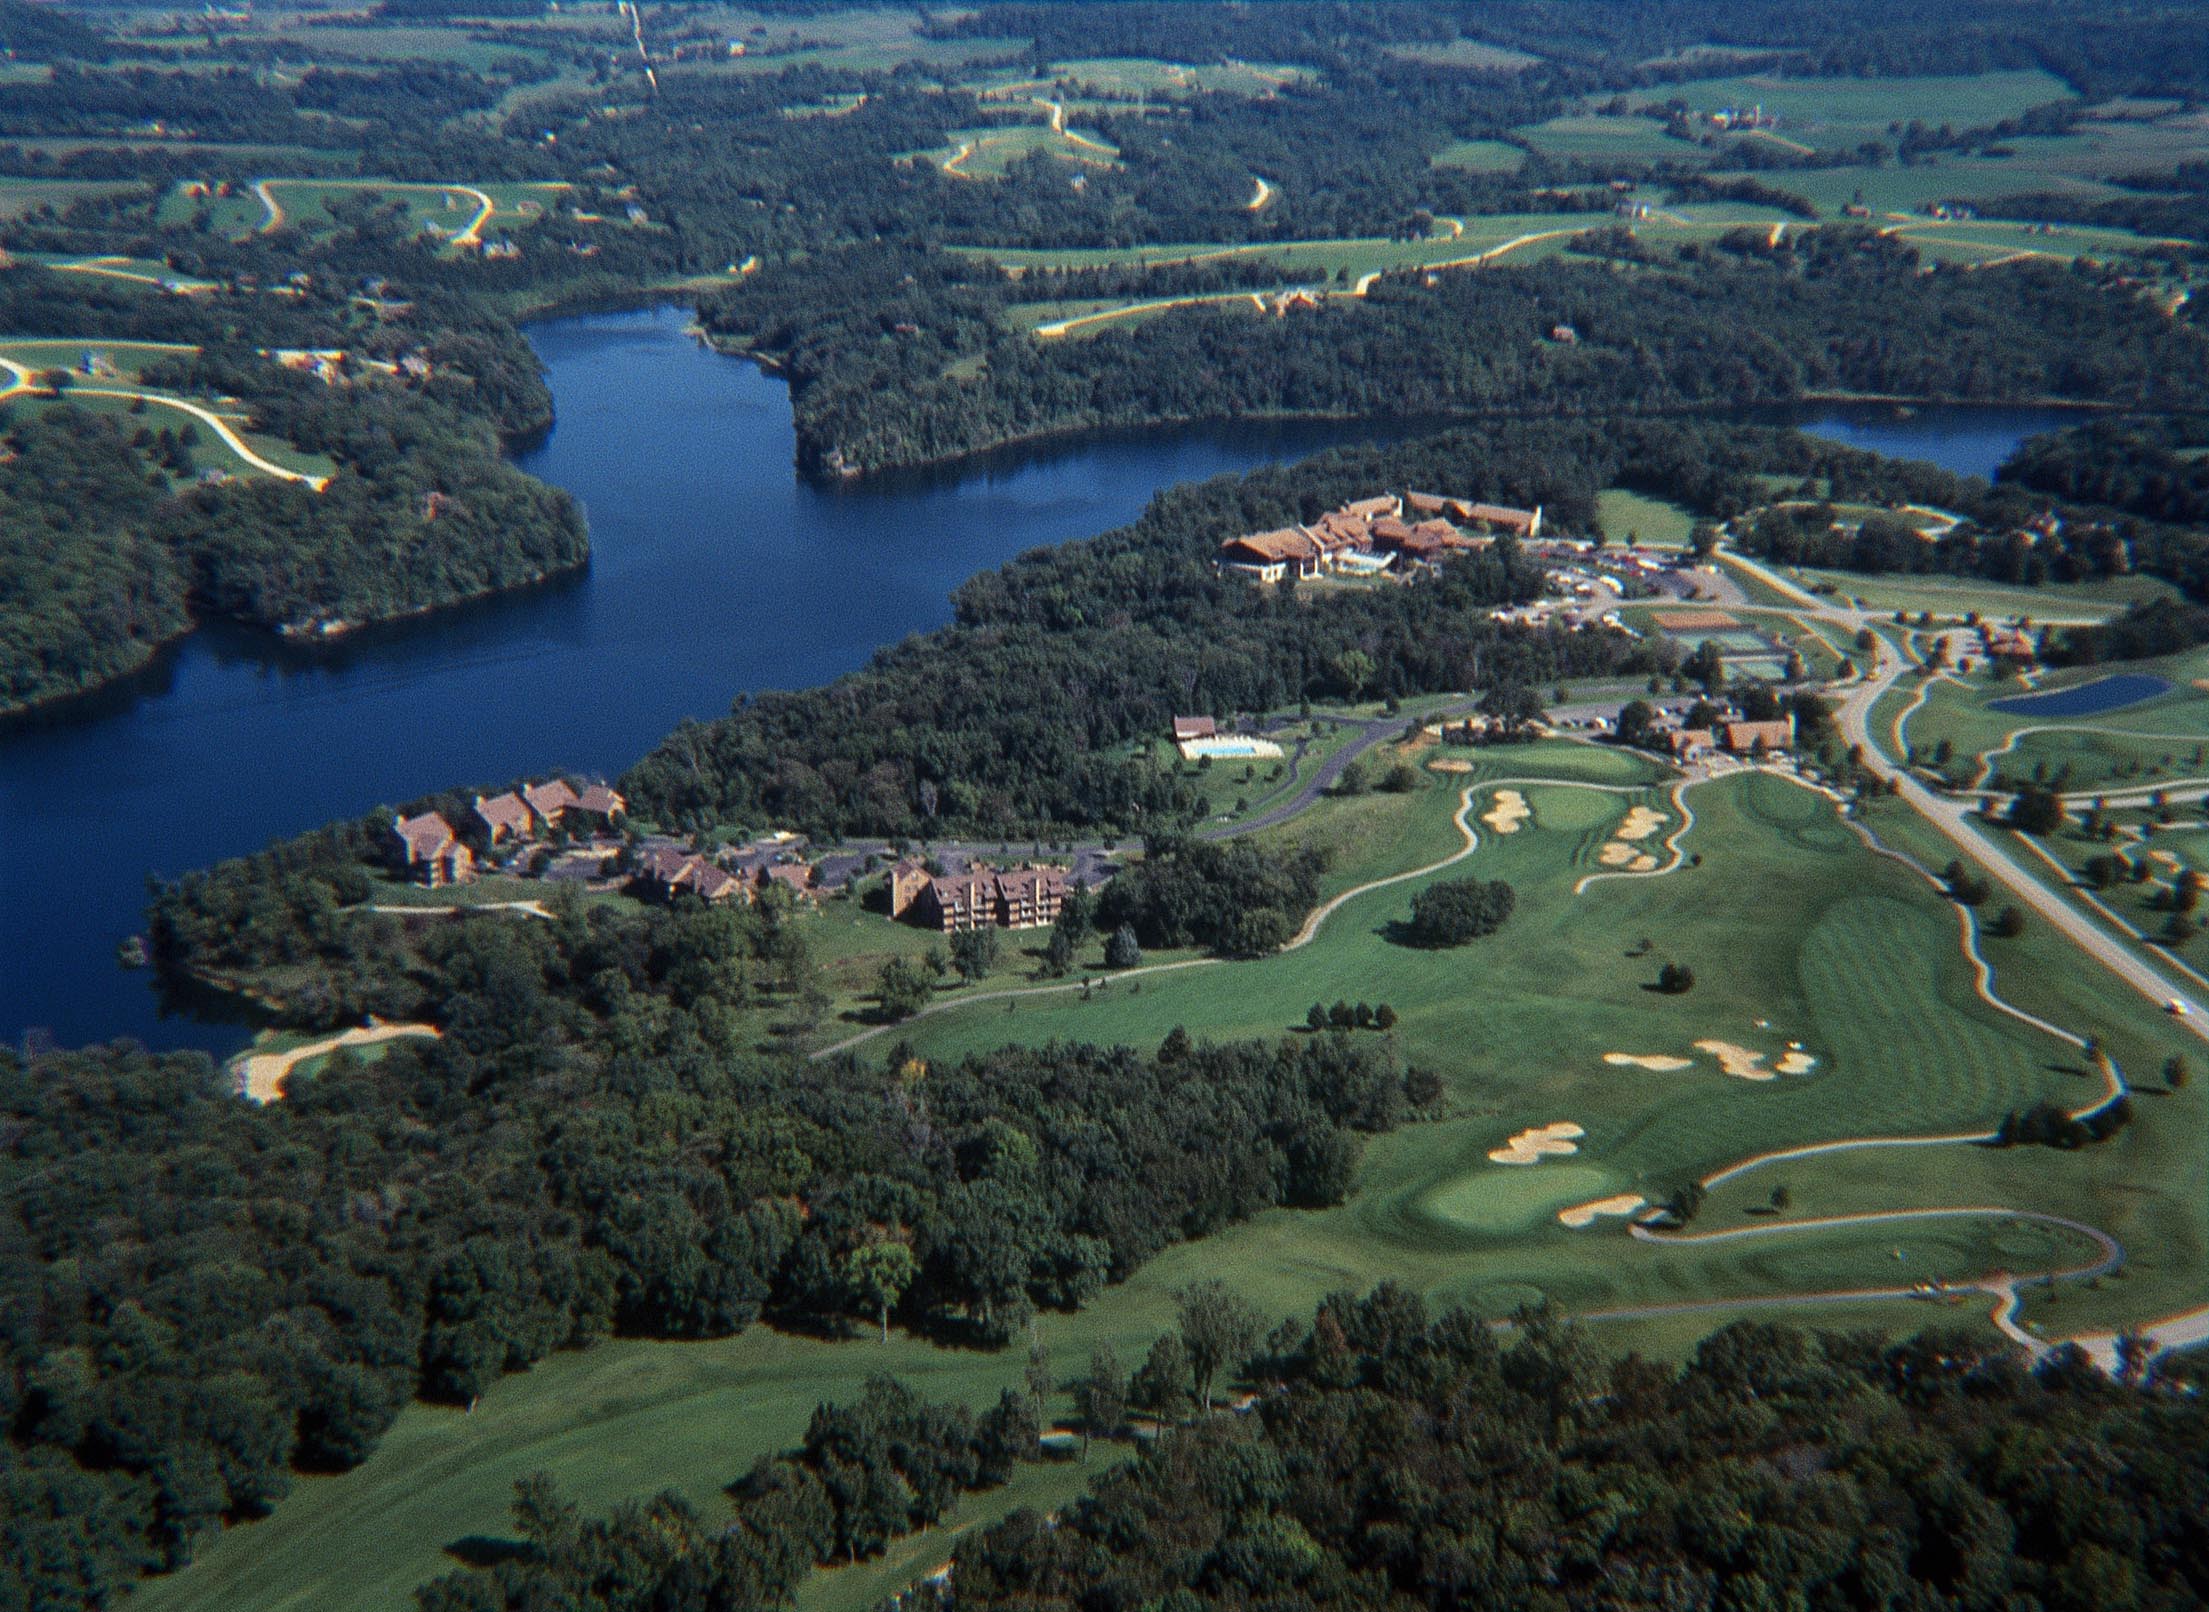 Located on 6,800 acres in The Galena Territory, Eagle Ridge Resort & Spa offers a secluded setting in the woodlands on Lake Galena